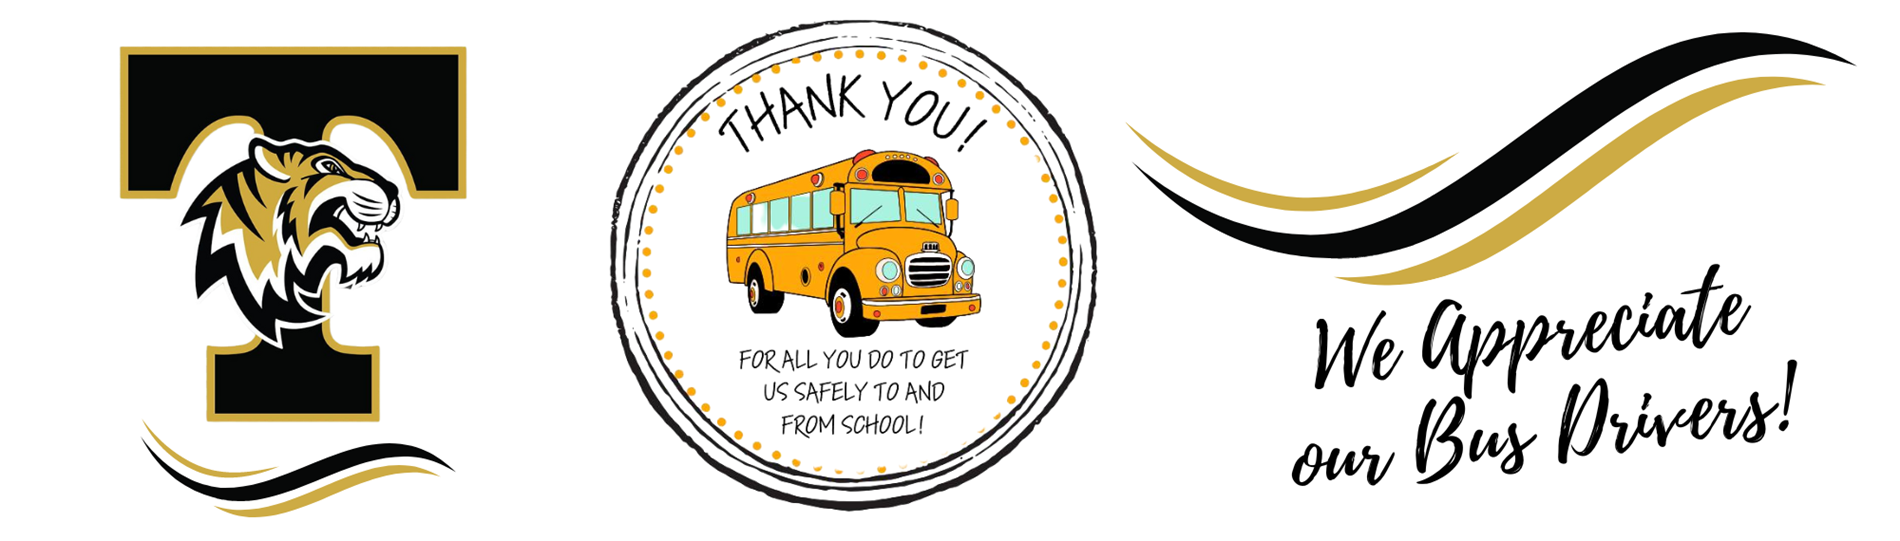 We Appreciate Our Bus Drivers!